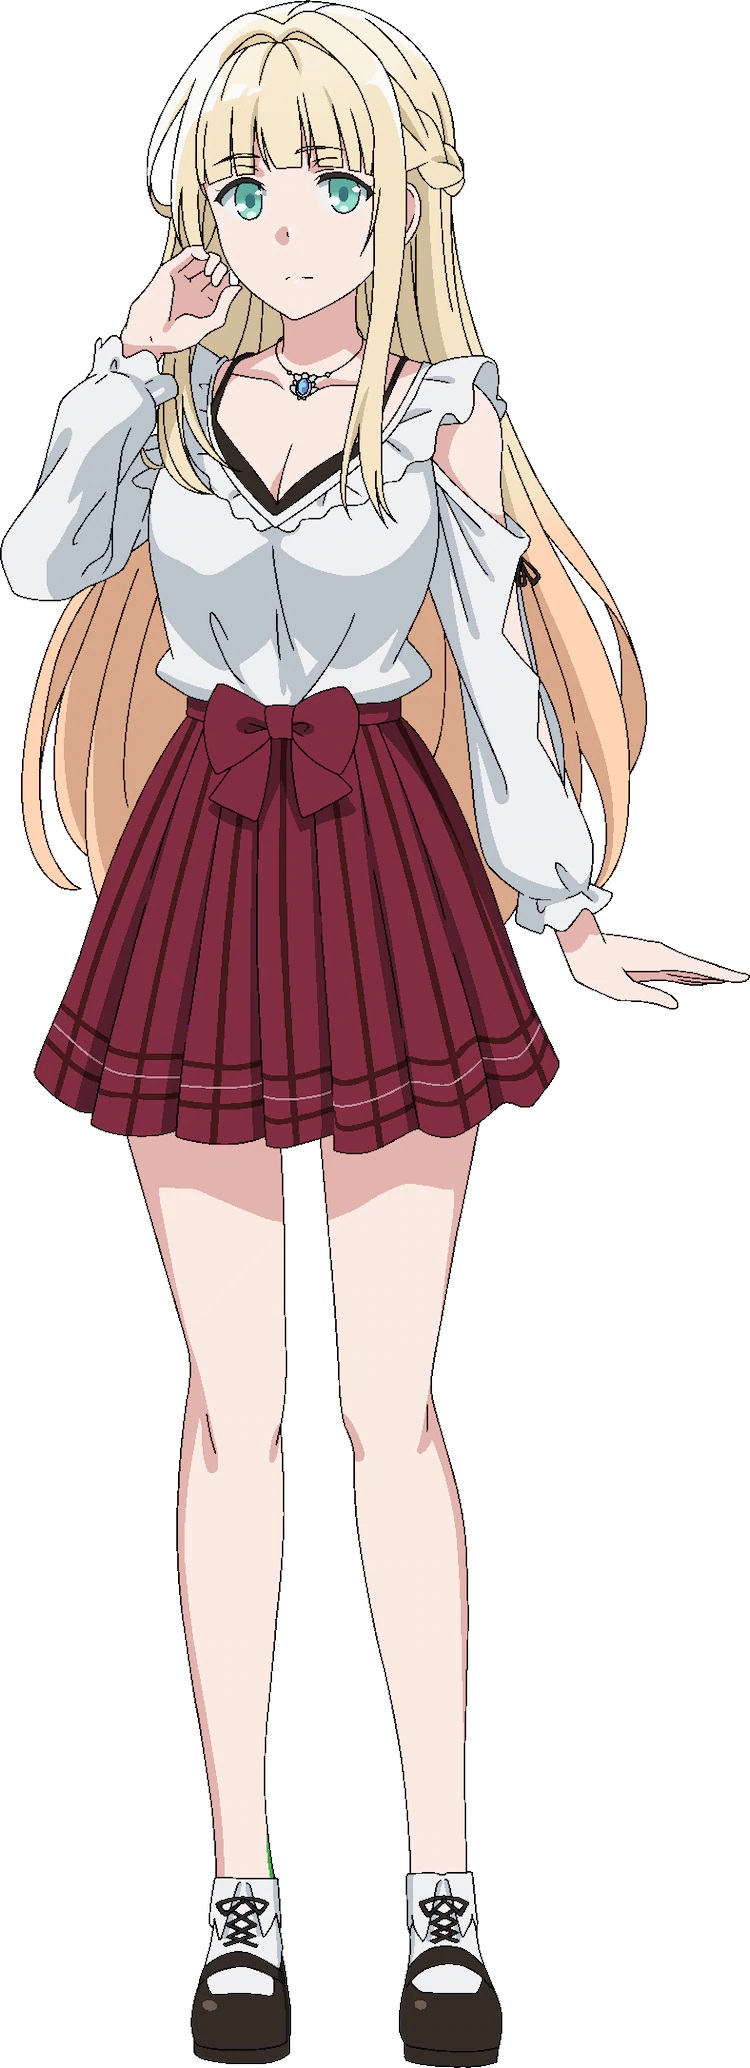 A character setting of Charlotte Arisaka Anderson, a blonde-haired, green-eyed young lady from the upcoming Tantei wa Mou, Shindeiru. TV anime.